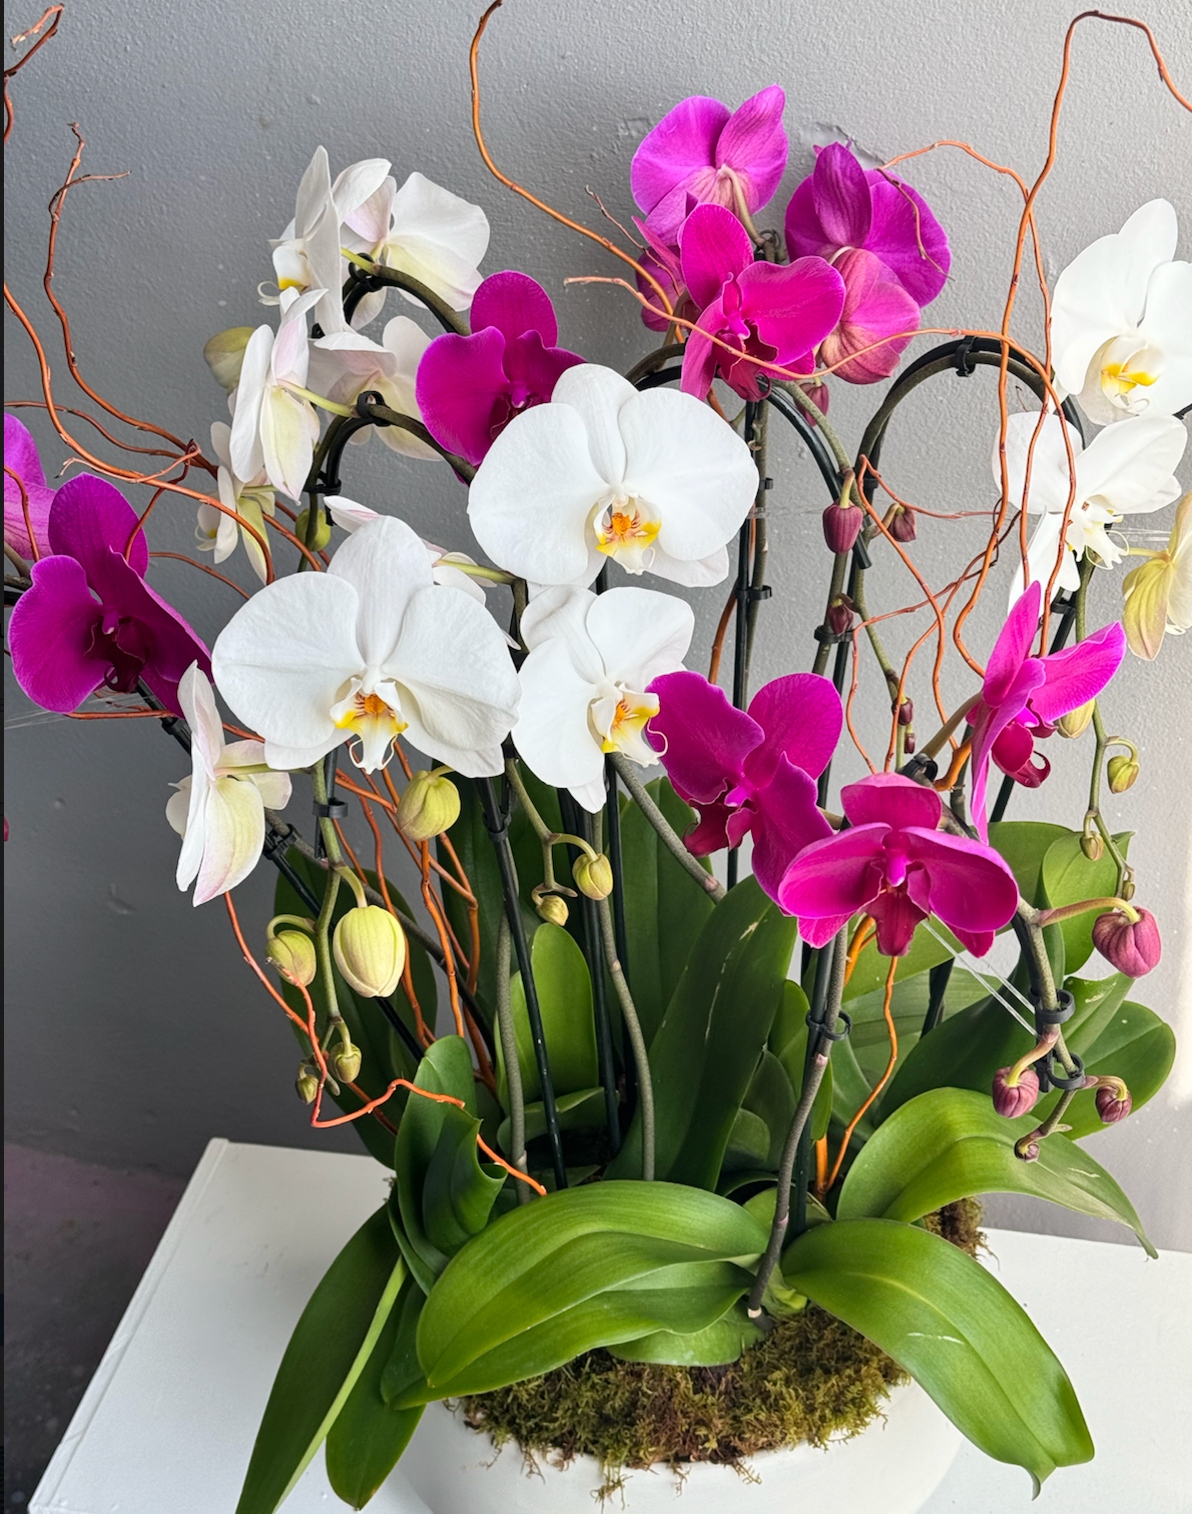 Floral arrangement “Twillight” - dark pink and white orchids with moss and curly willow